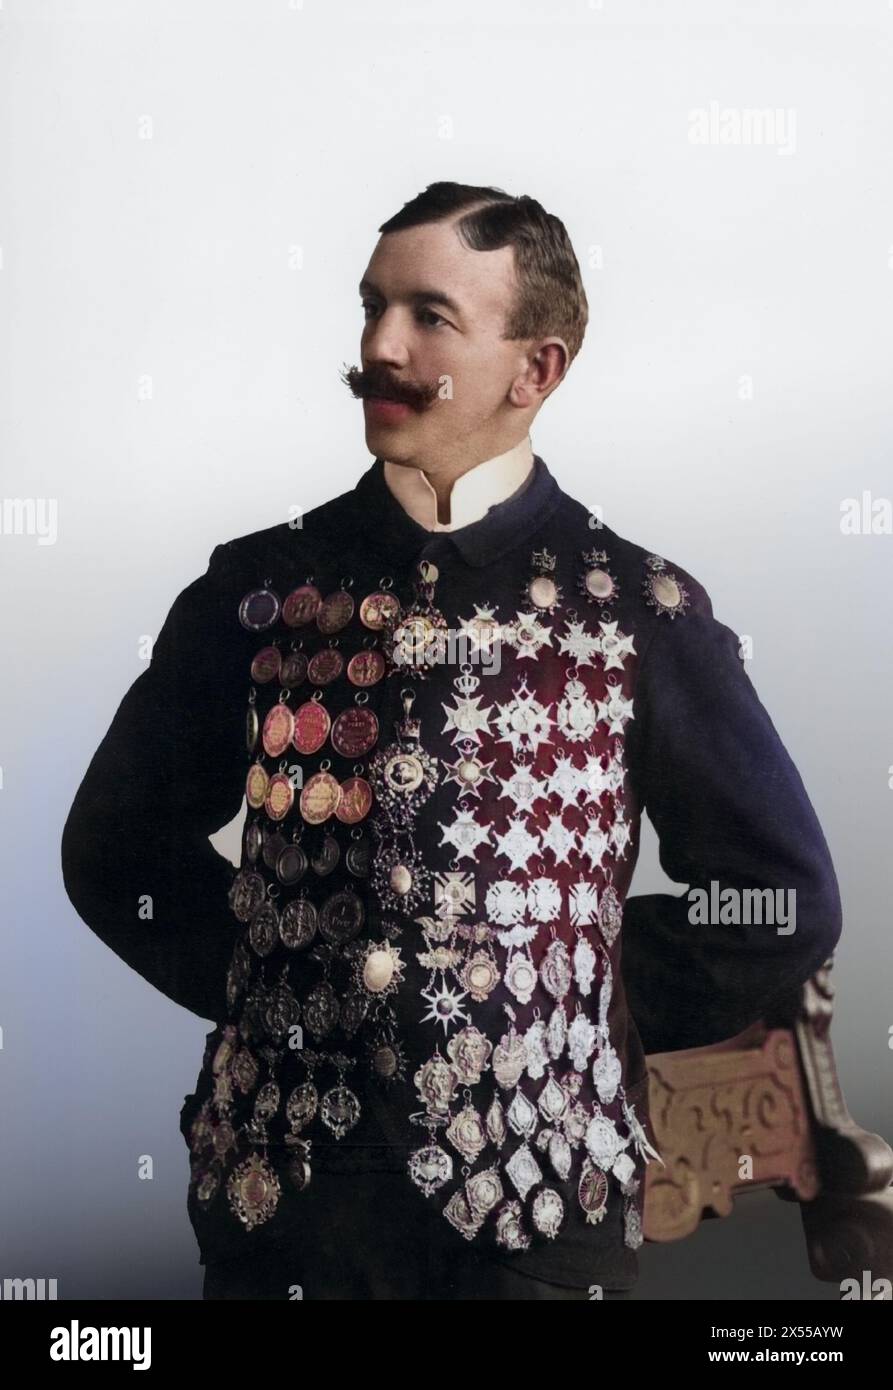 people, men, portrait / half length 1900s, man in jacket with medal, Munich, circa 1900, ADDITIONAL-RIGHTS-CLEARANCE-INFO-NOT-AVAILABLE Stock Photo